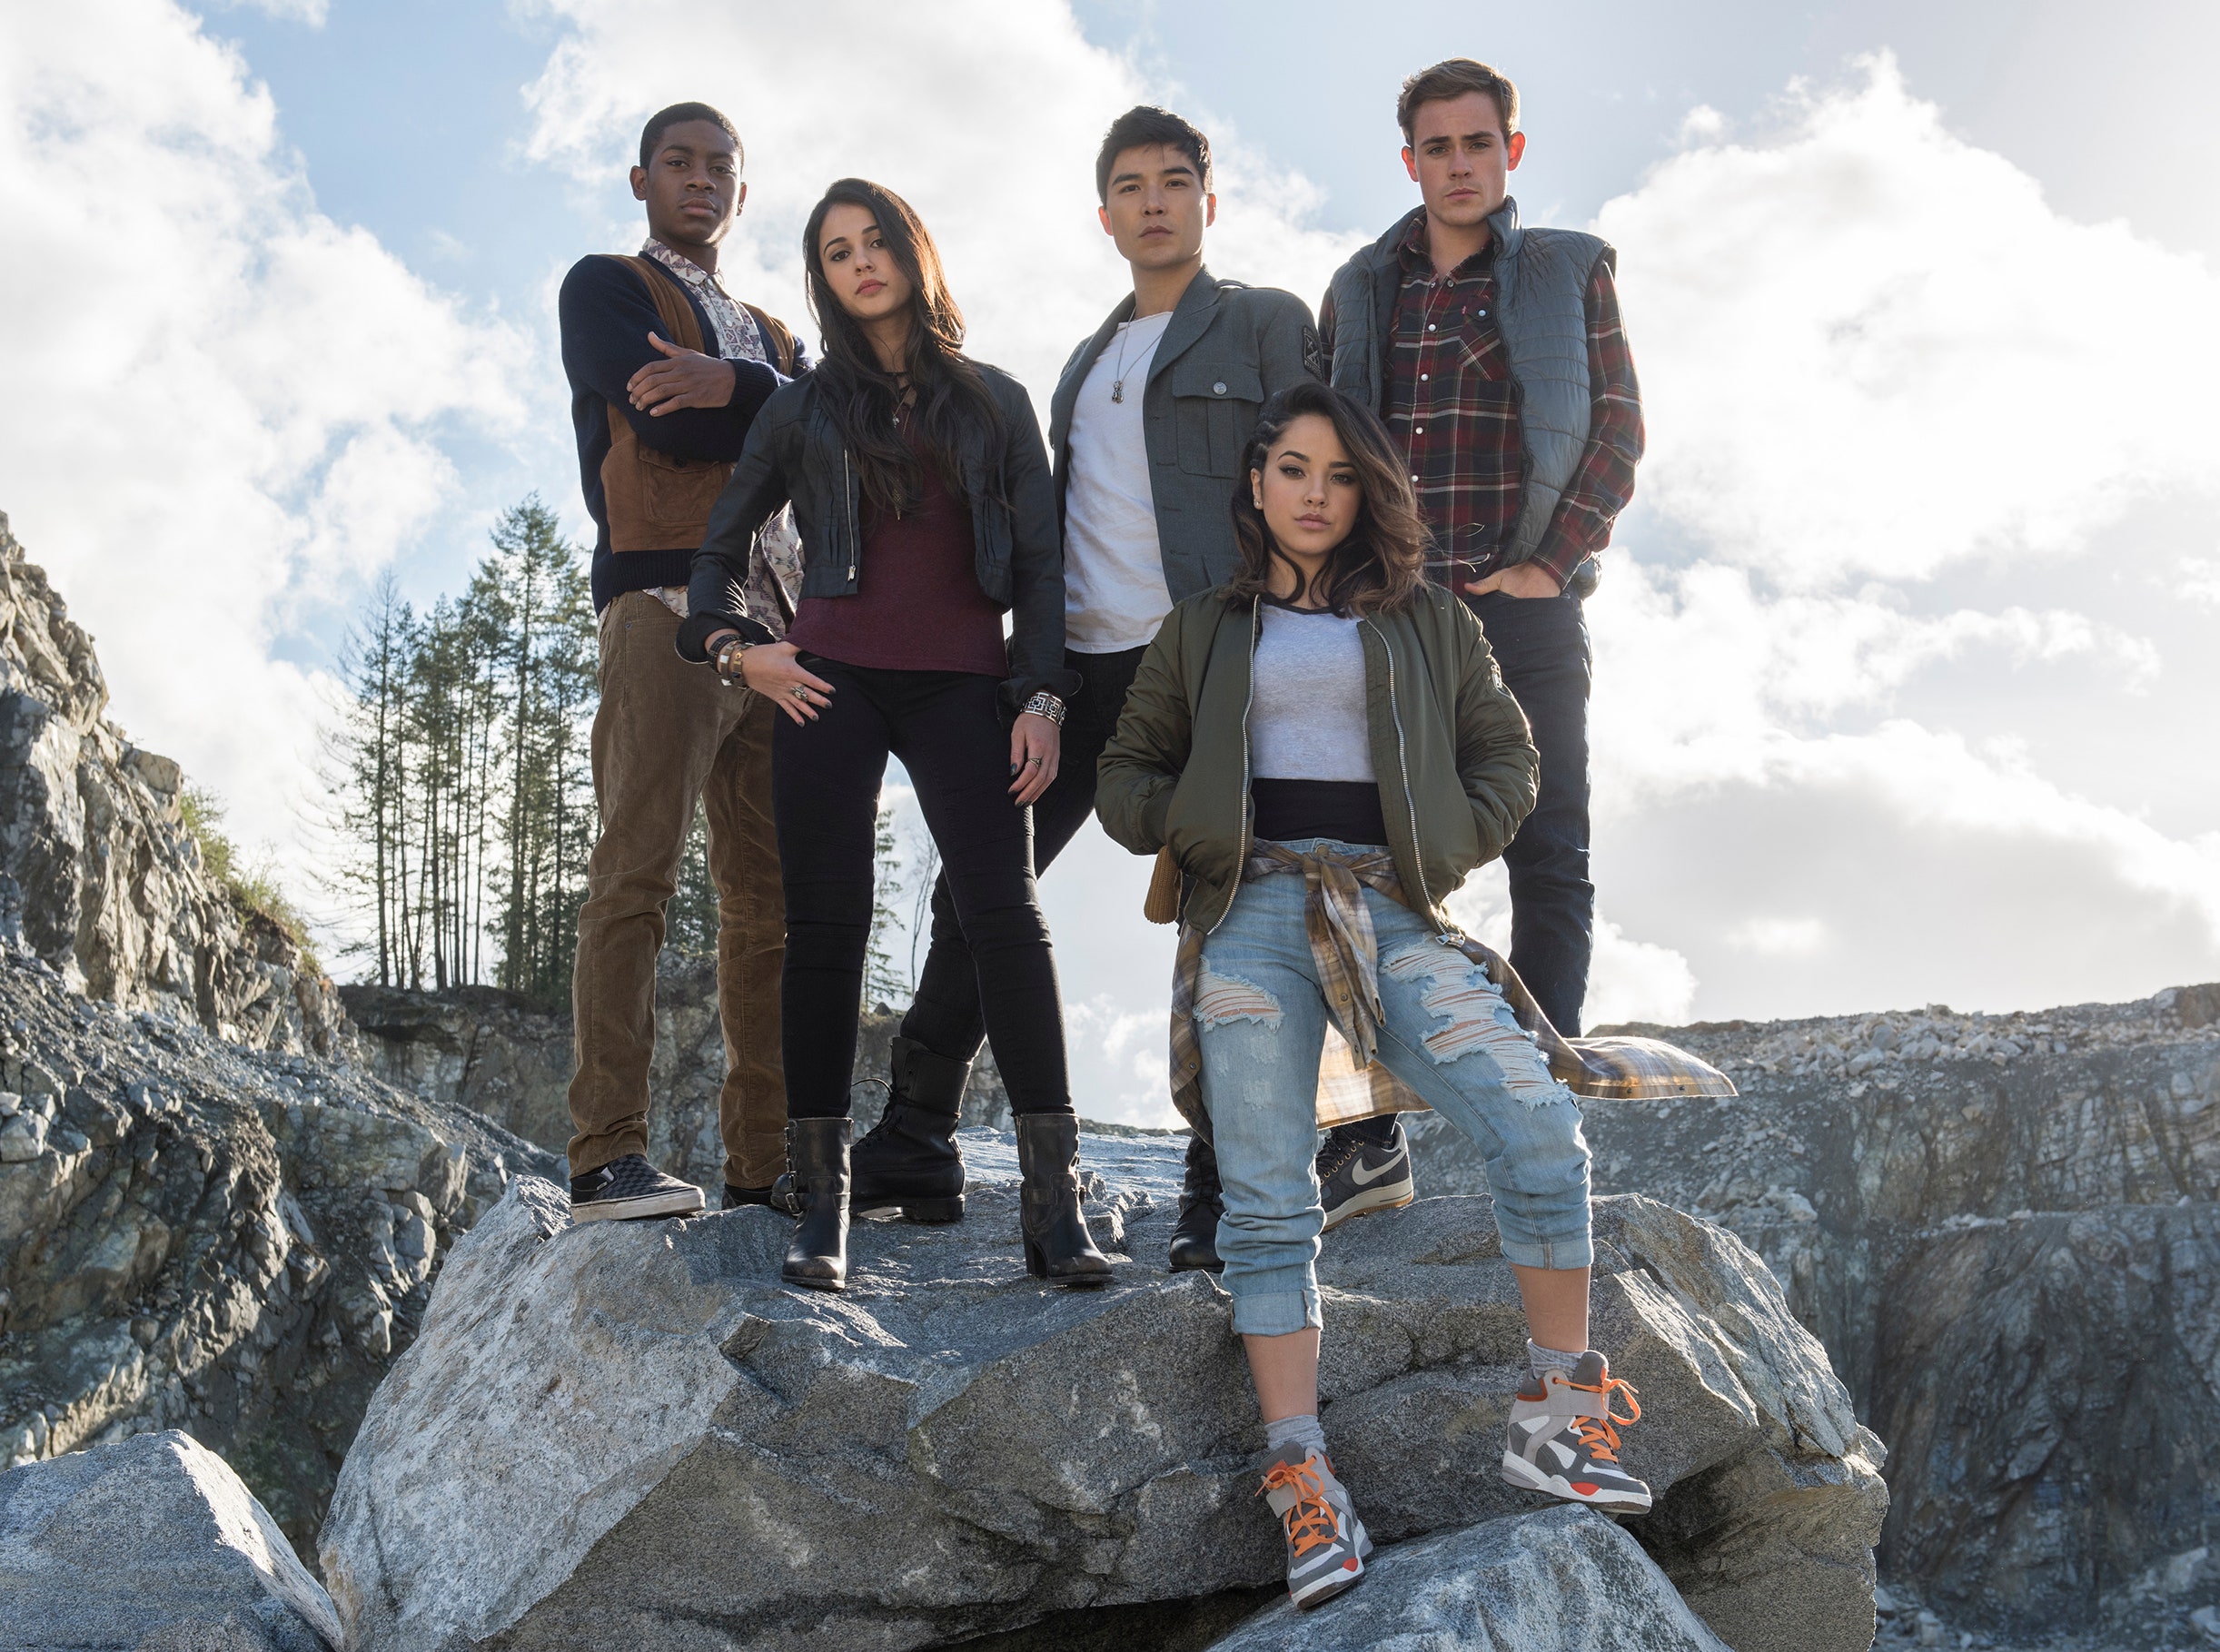 Power Rangers Stars Want The Sequel To Have A Feminist Twist